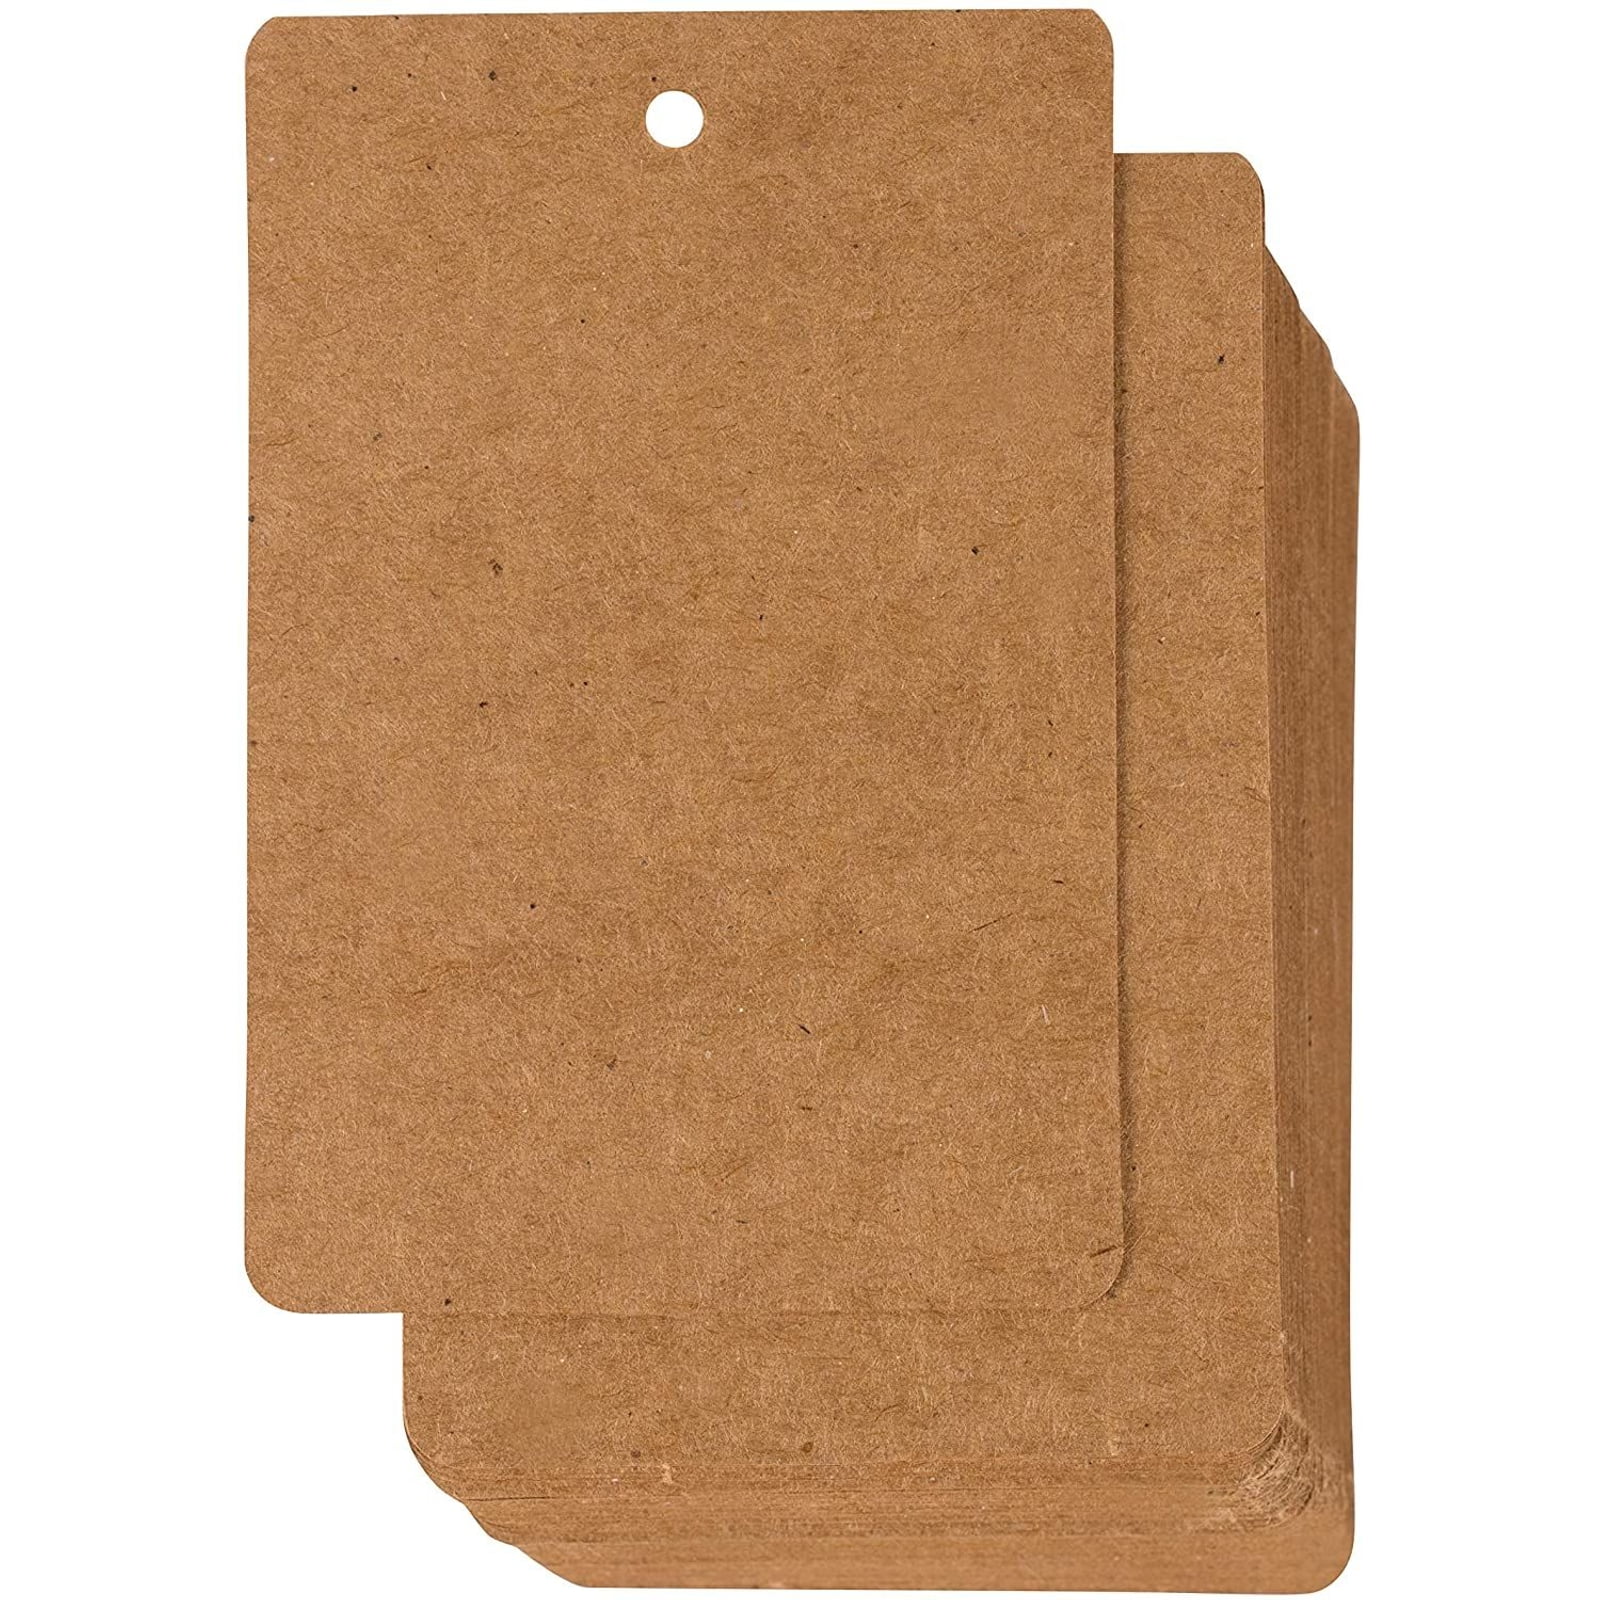 100x Christmas Kraft Paper Hang Tags Wedding Party Favors Label Price Cards 